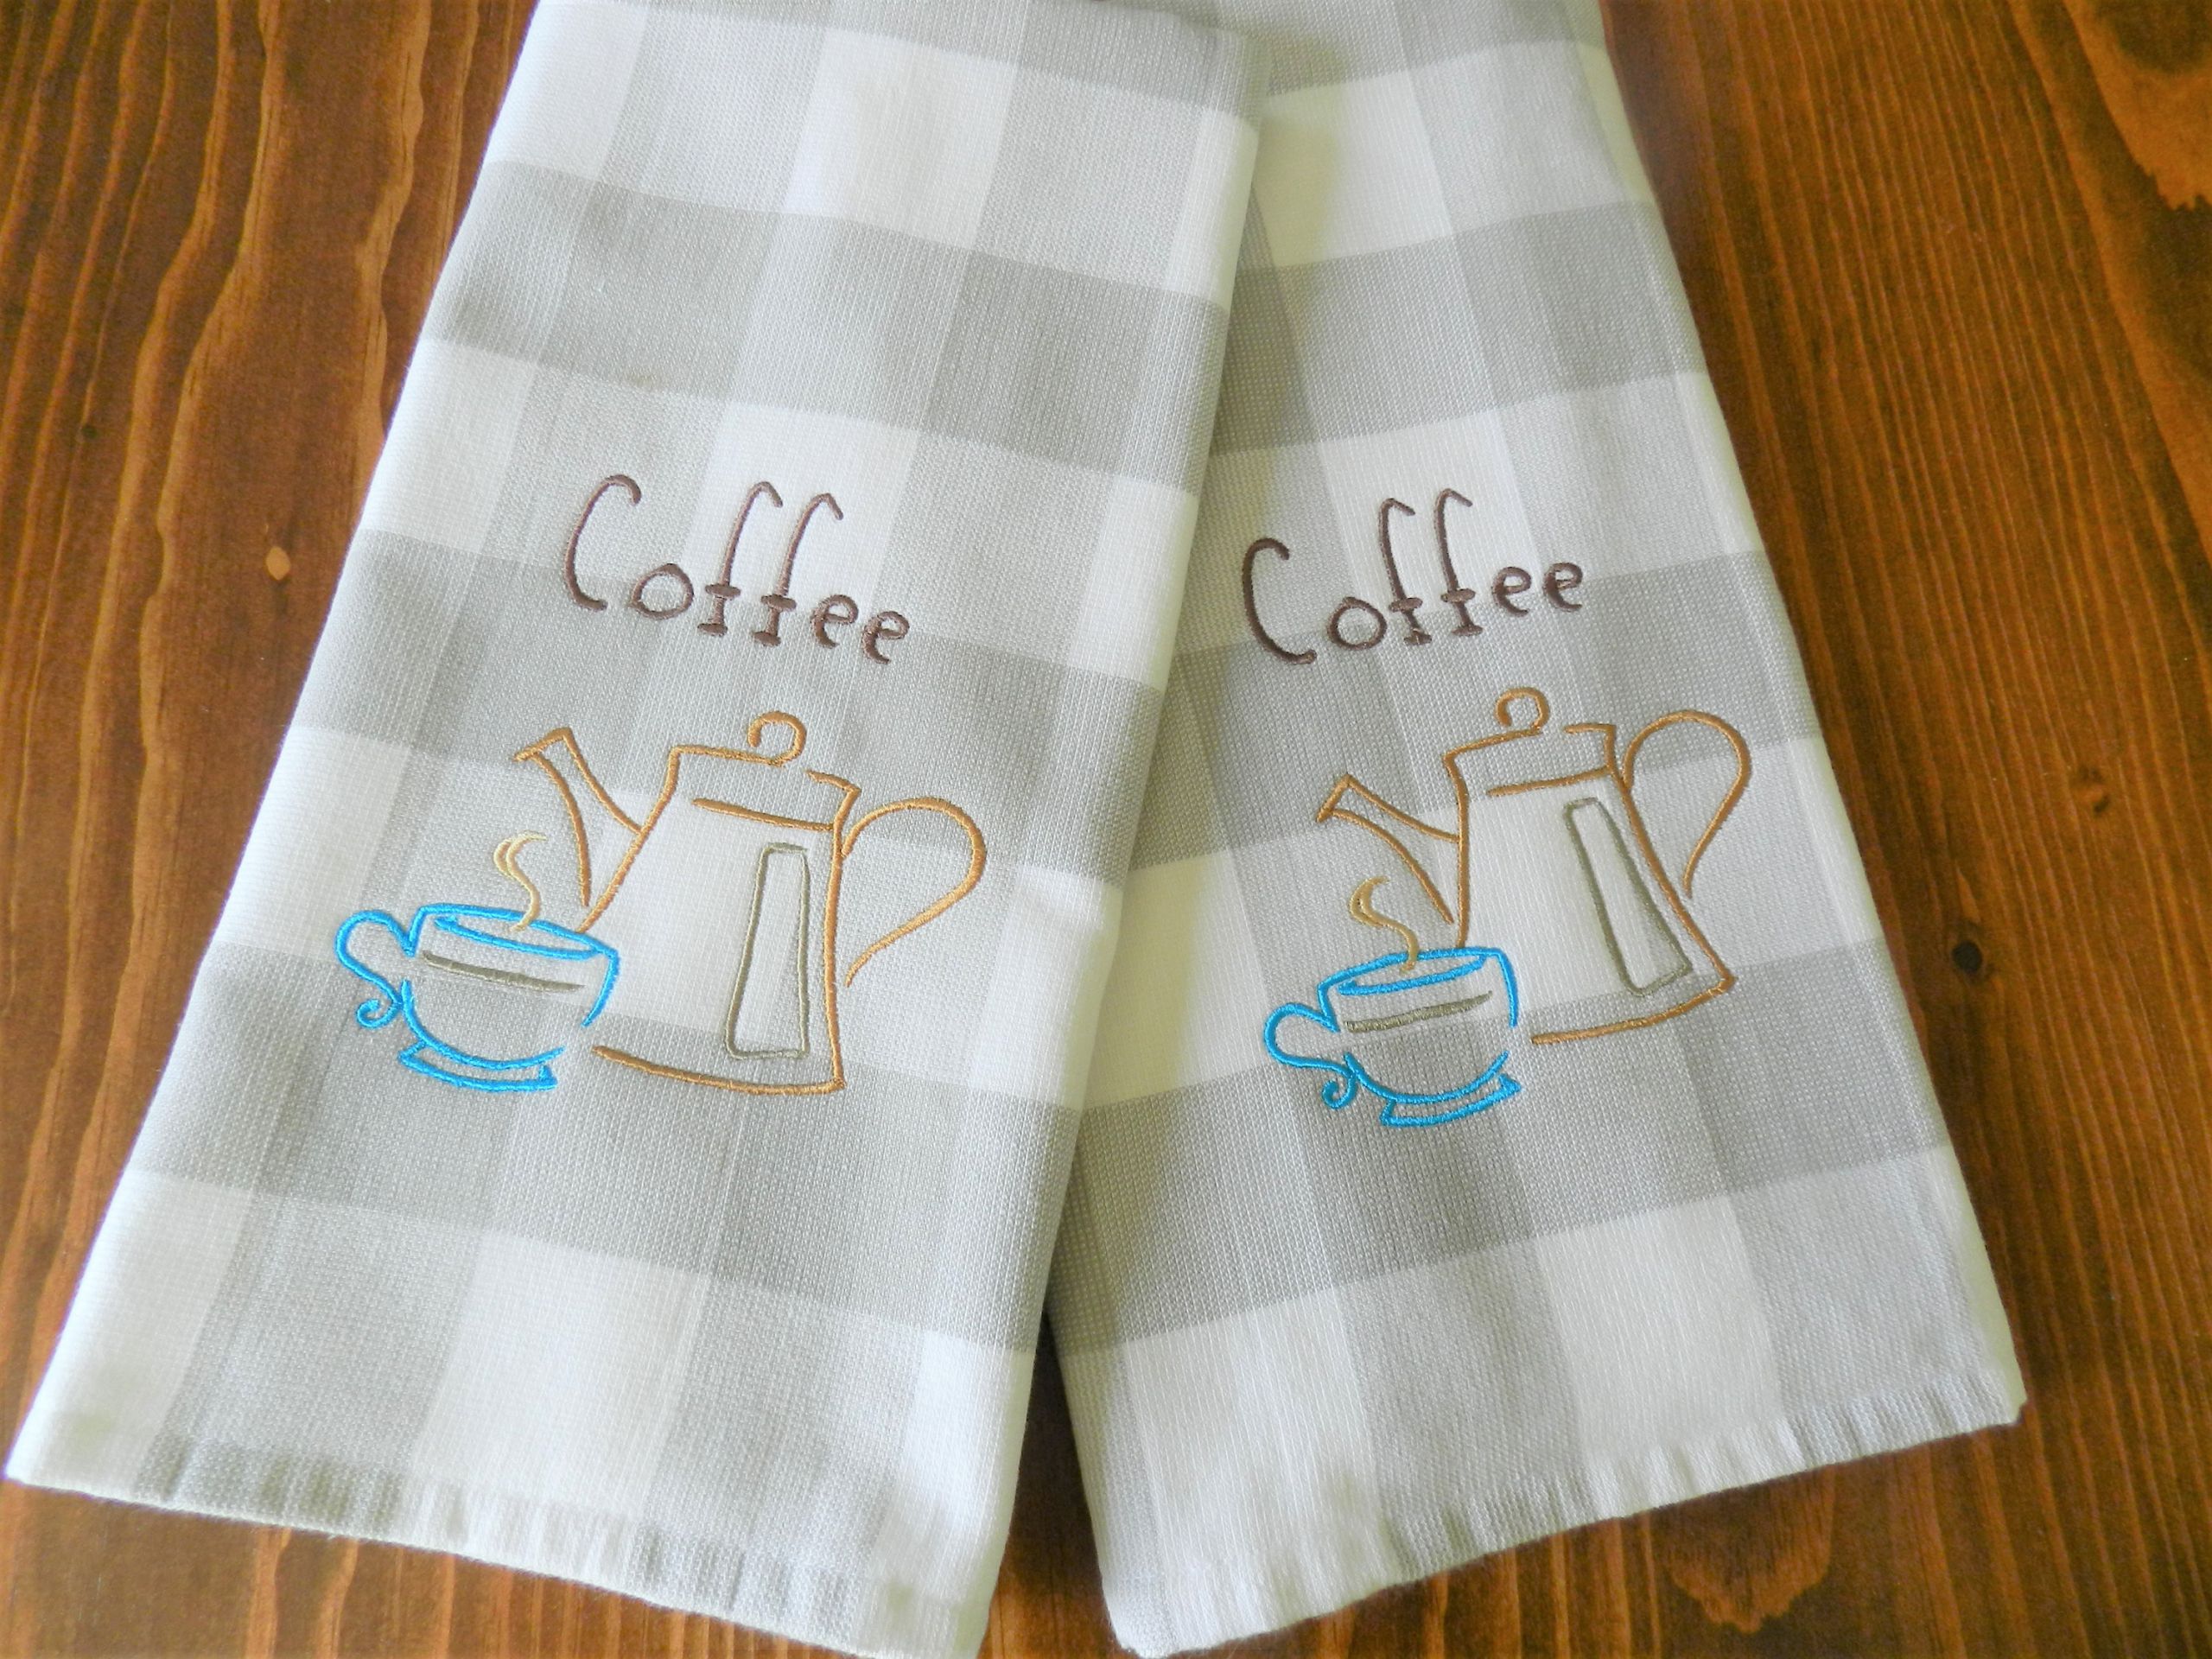 Rustic Kitchen Towels
 2 New Gray Towels Coffee Towels Rustic Kitchen Towels New